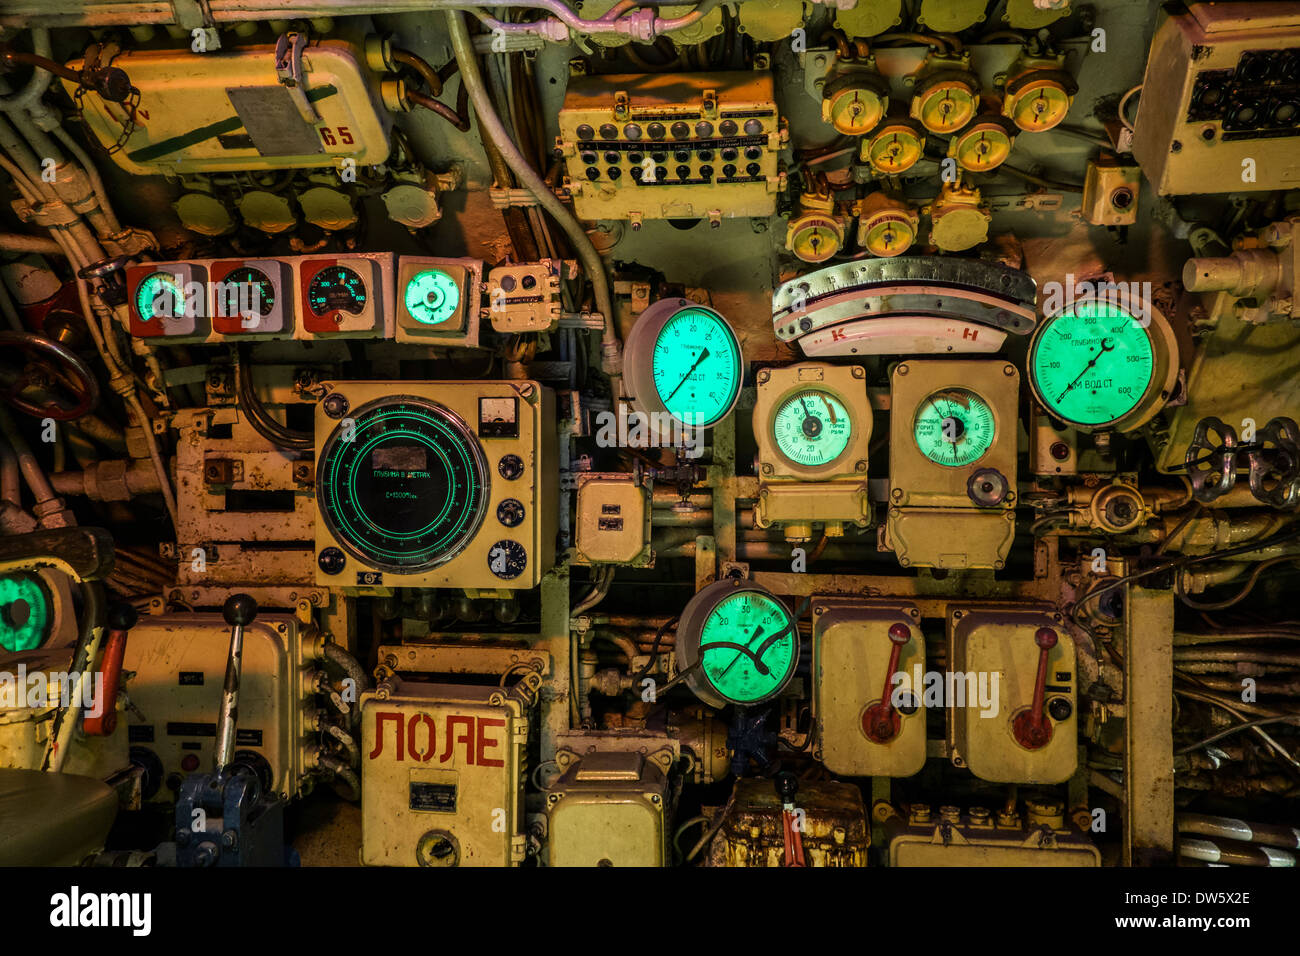 Green indicators, switches and dials on instruments in operations / control room inside Russian submarine B-143 / U-480 Foxtrot Stock Photo